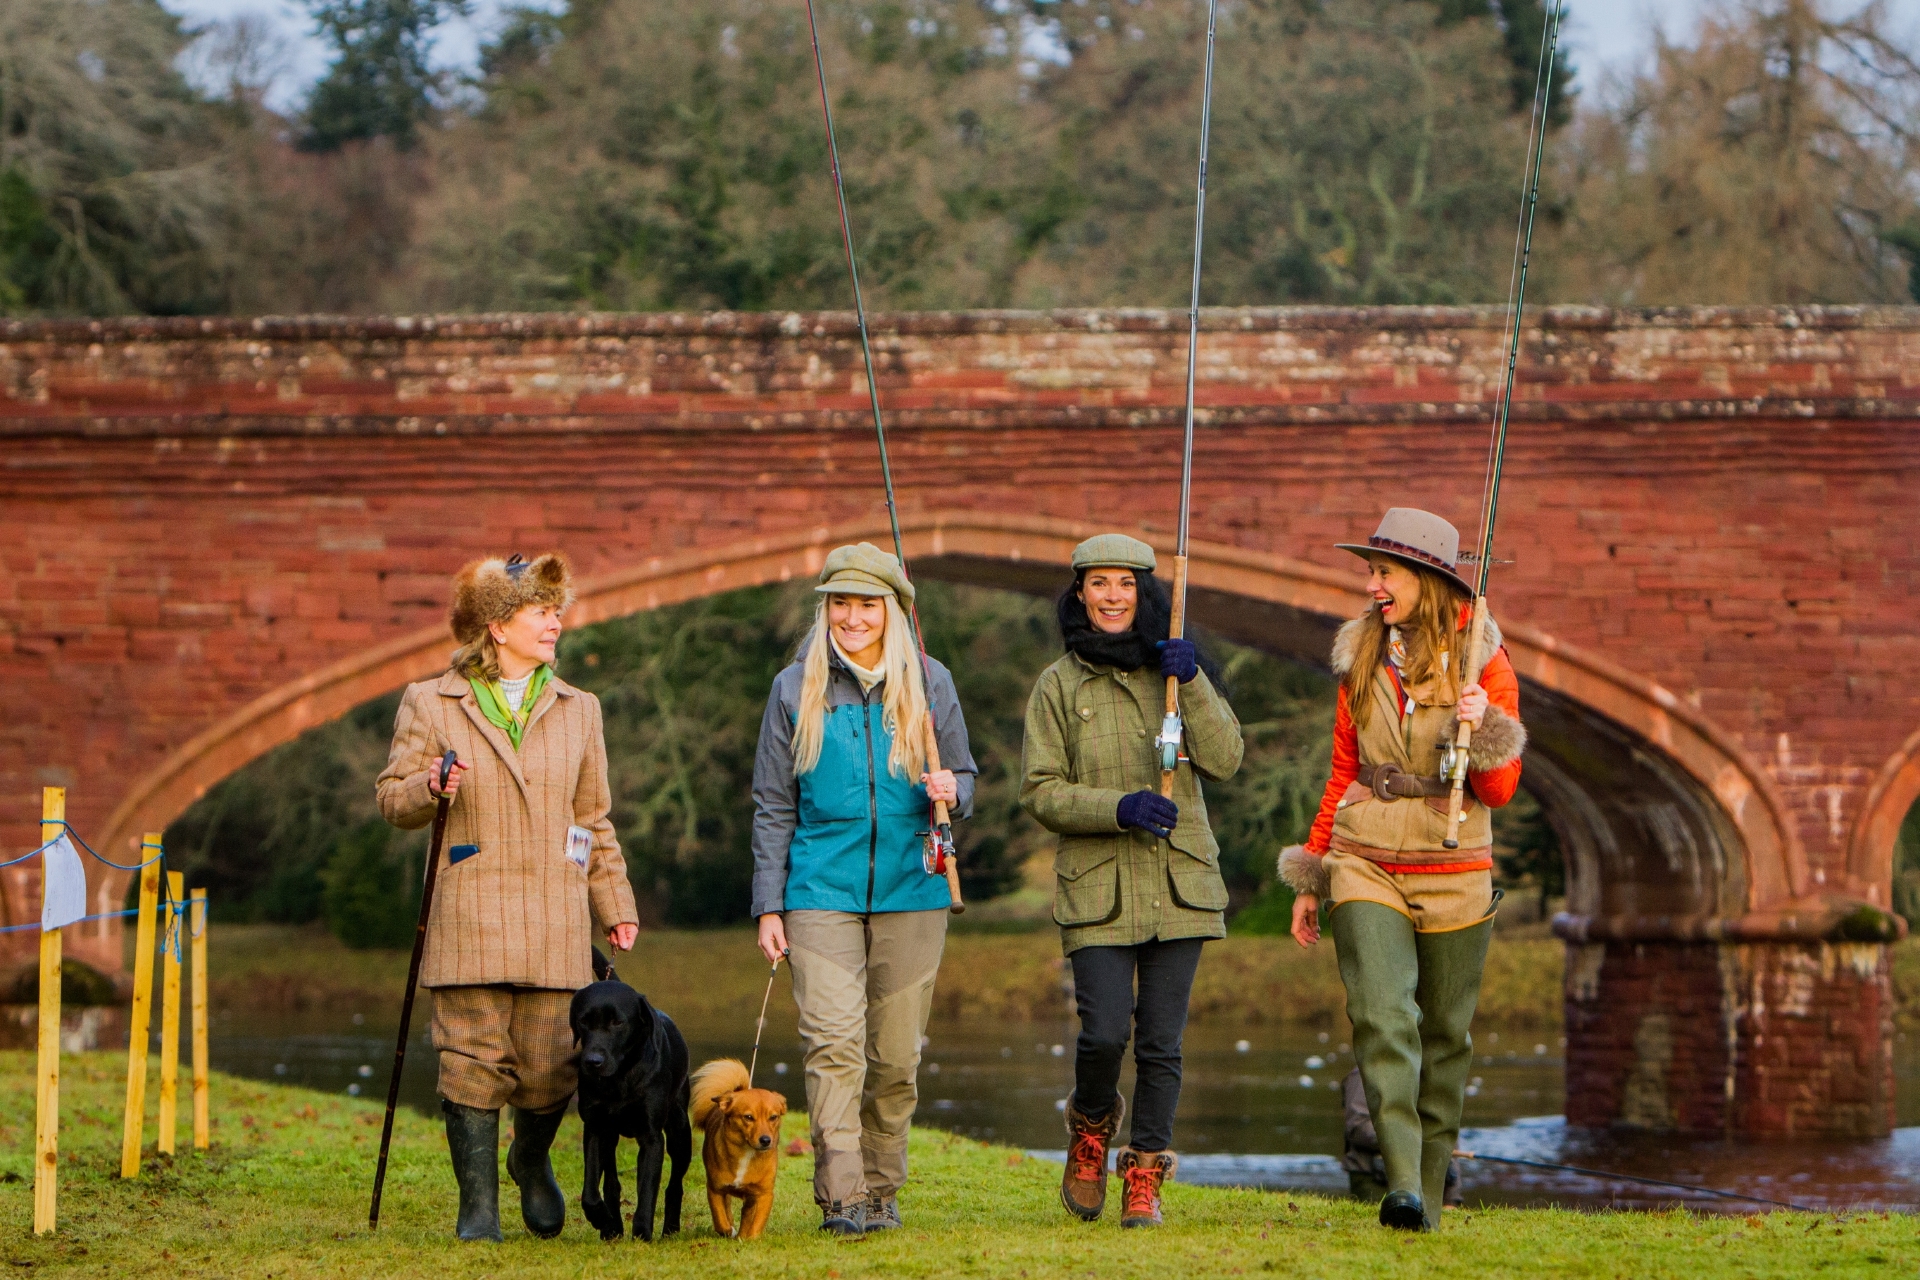 Joanna Gibson with dog Smolt alongside her daughter Marina Gibson with her dog Sedge, Gayle Ritchie and Claire Mercer Nairne of Meikleour Fishings.